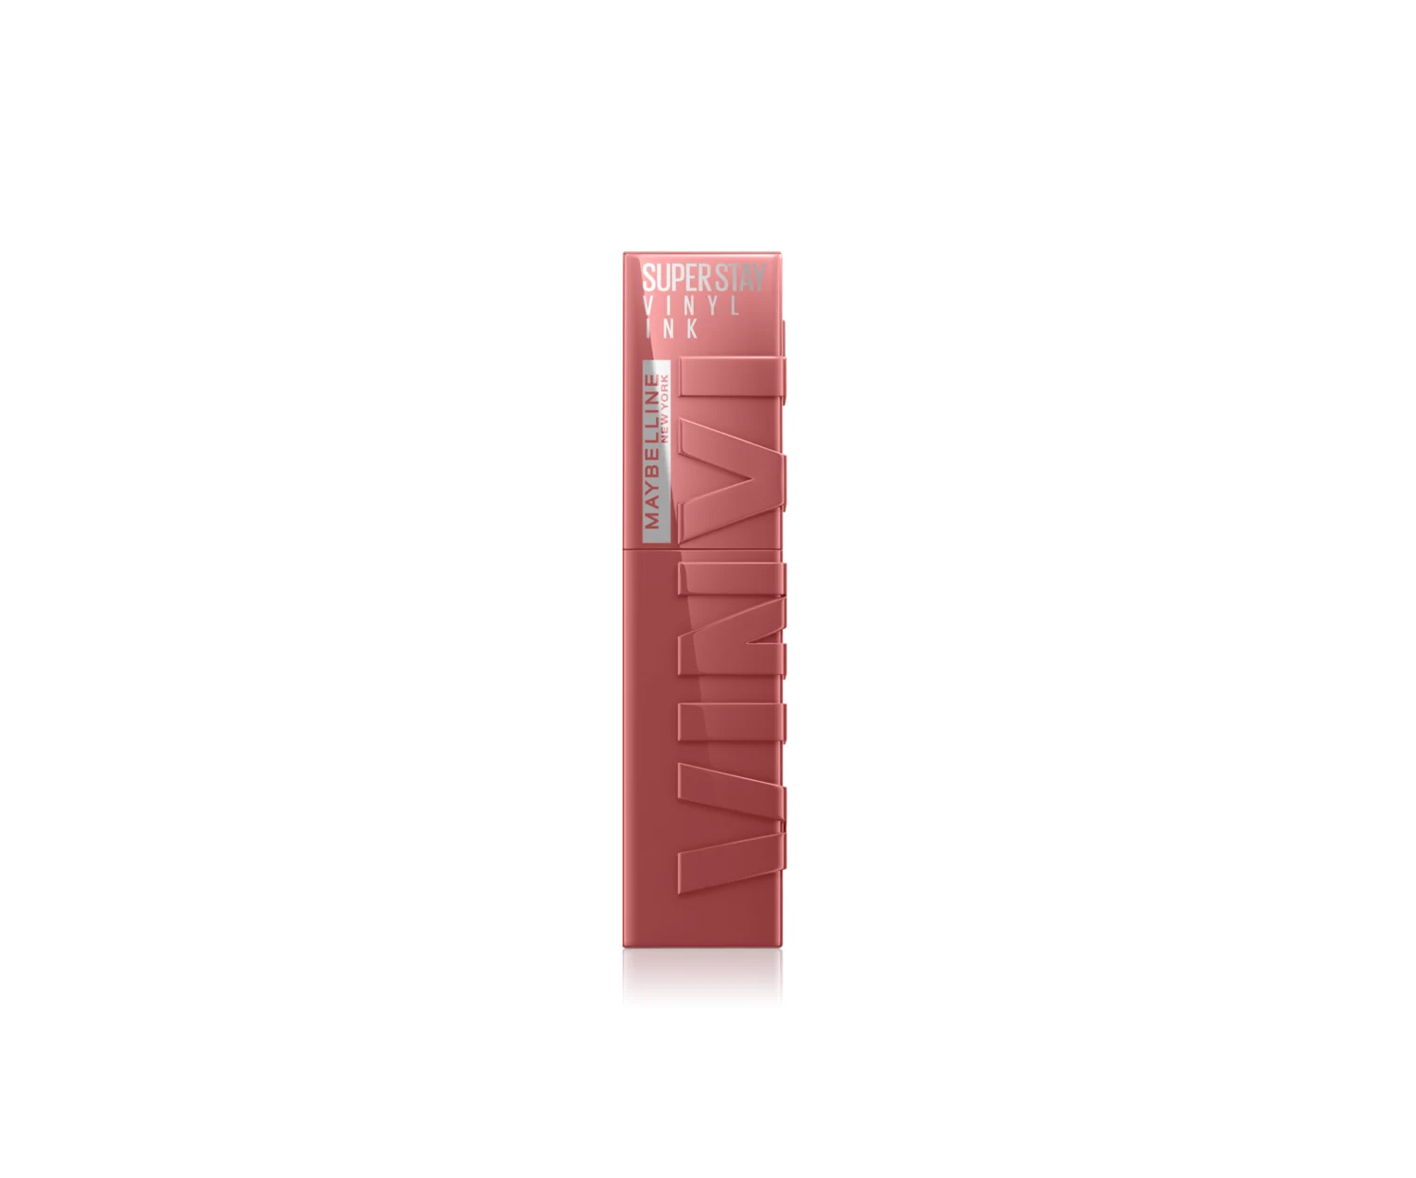 Maybelline New York, Super Stay Vinyl Ink, Long-lasting lipstick with a vinyl finish